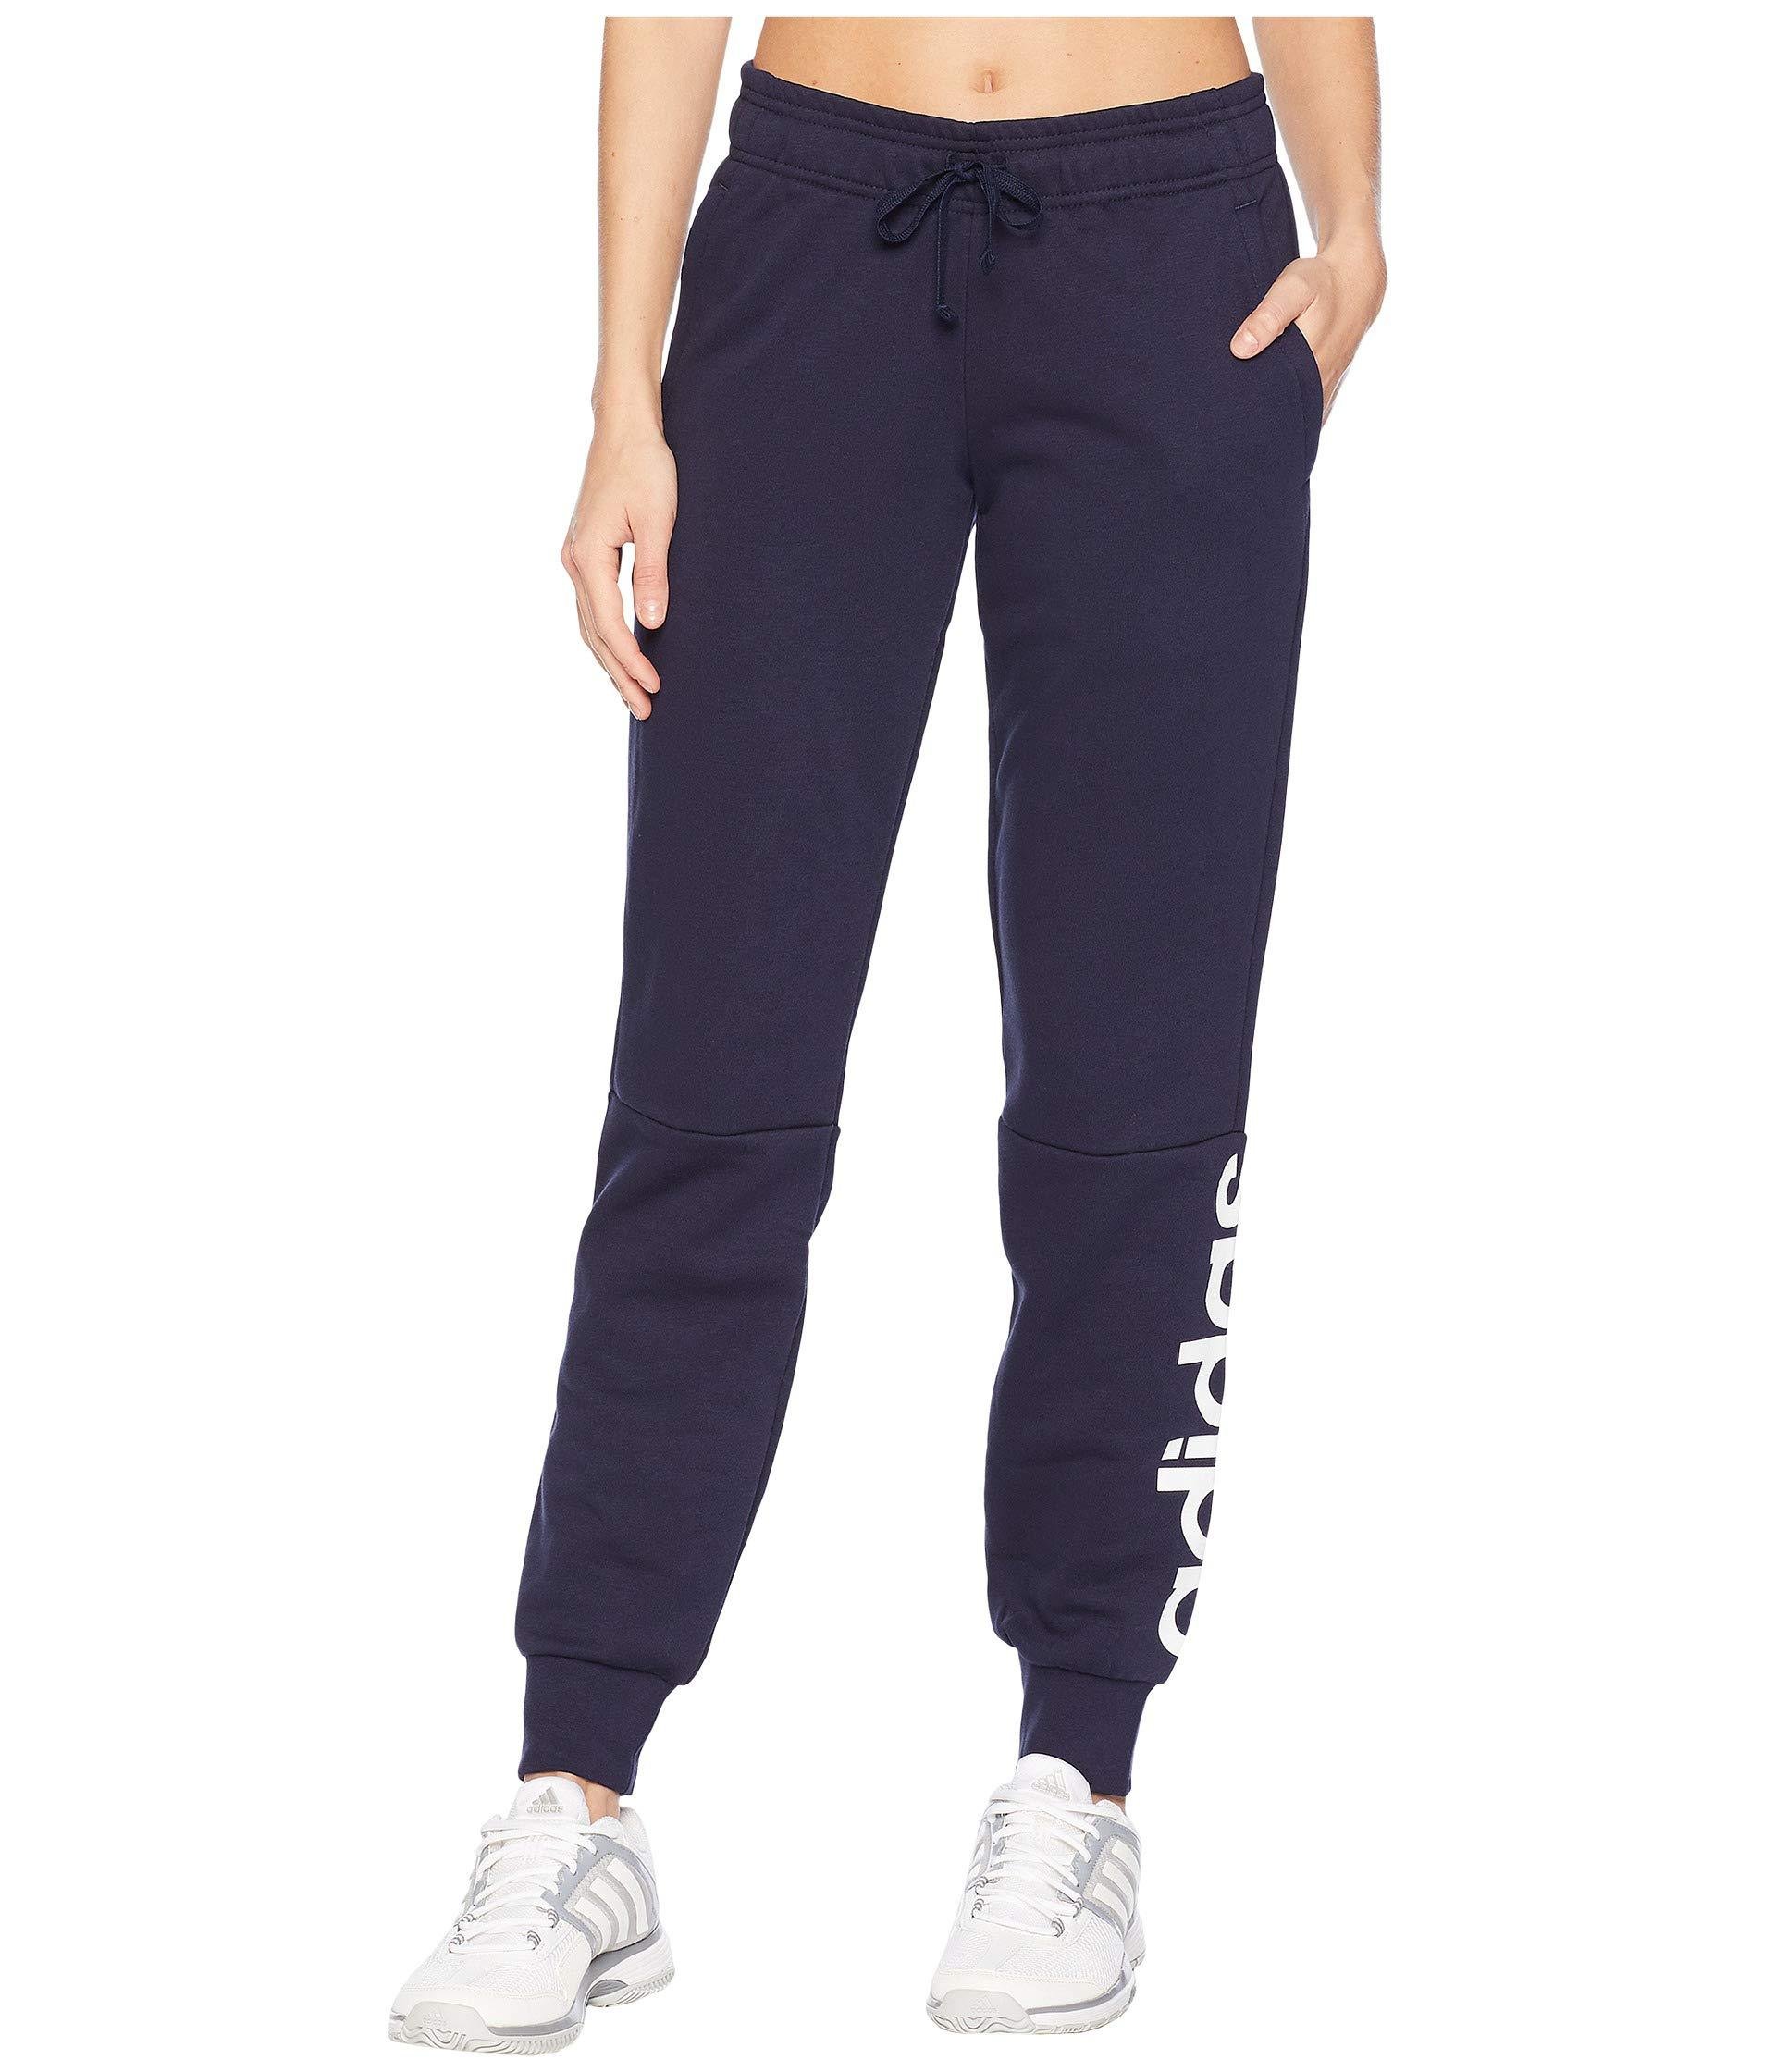 Lyst - Adidas Essentials Linear Pants in Blue